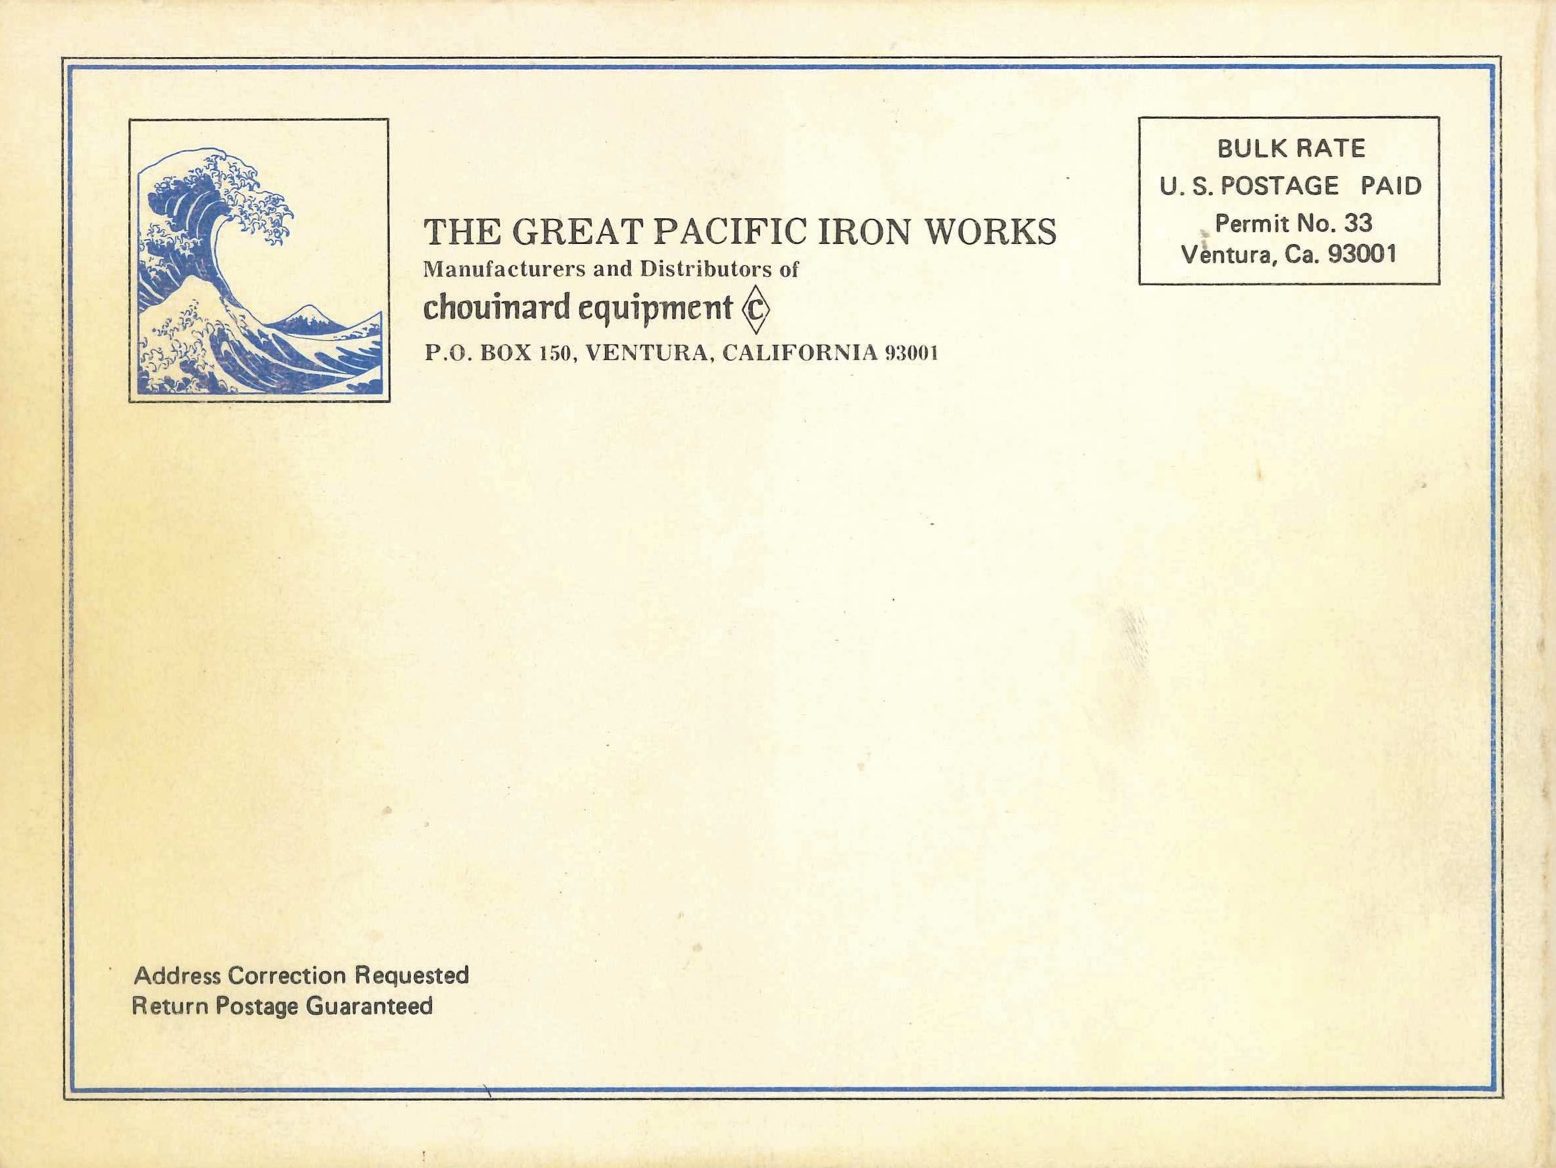 Chouinard / Great Pacific Iron Works Catalog - 1975 - Trip Reports 